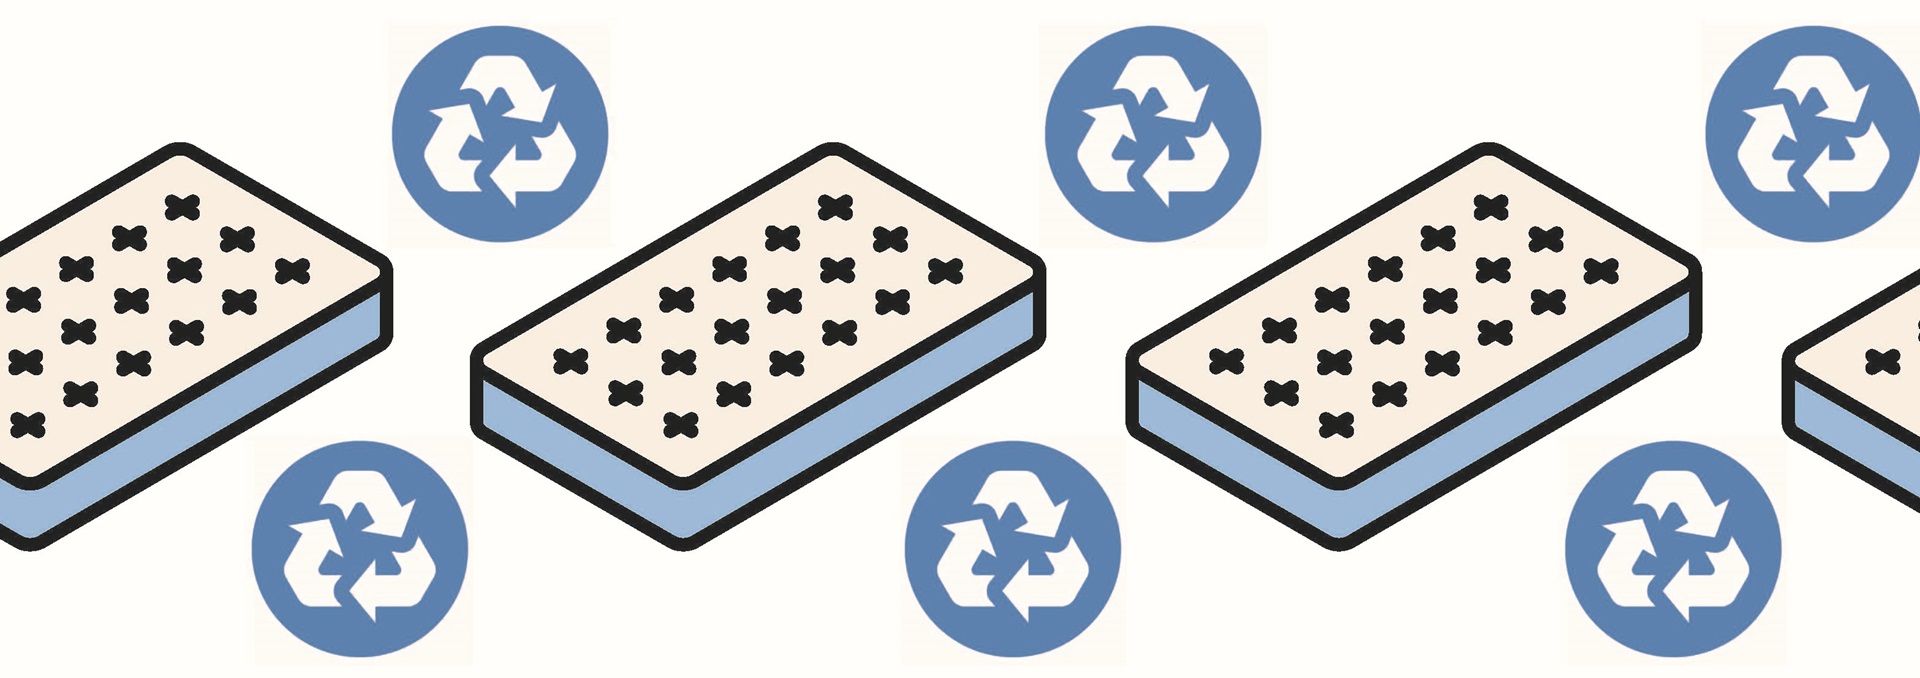 Cartoon images of mattresses and recycling symbols